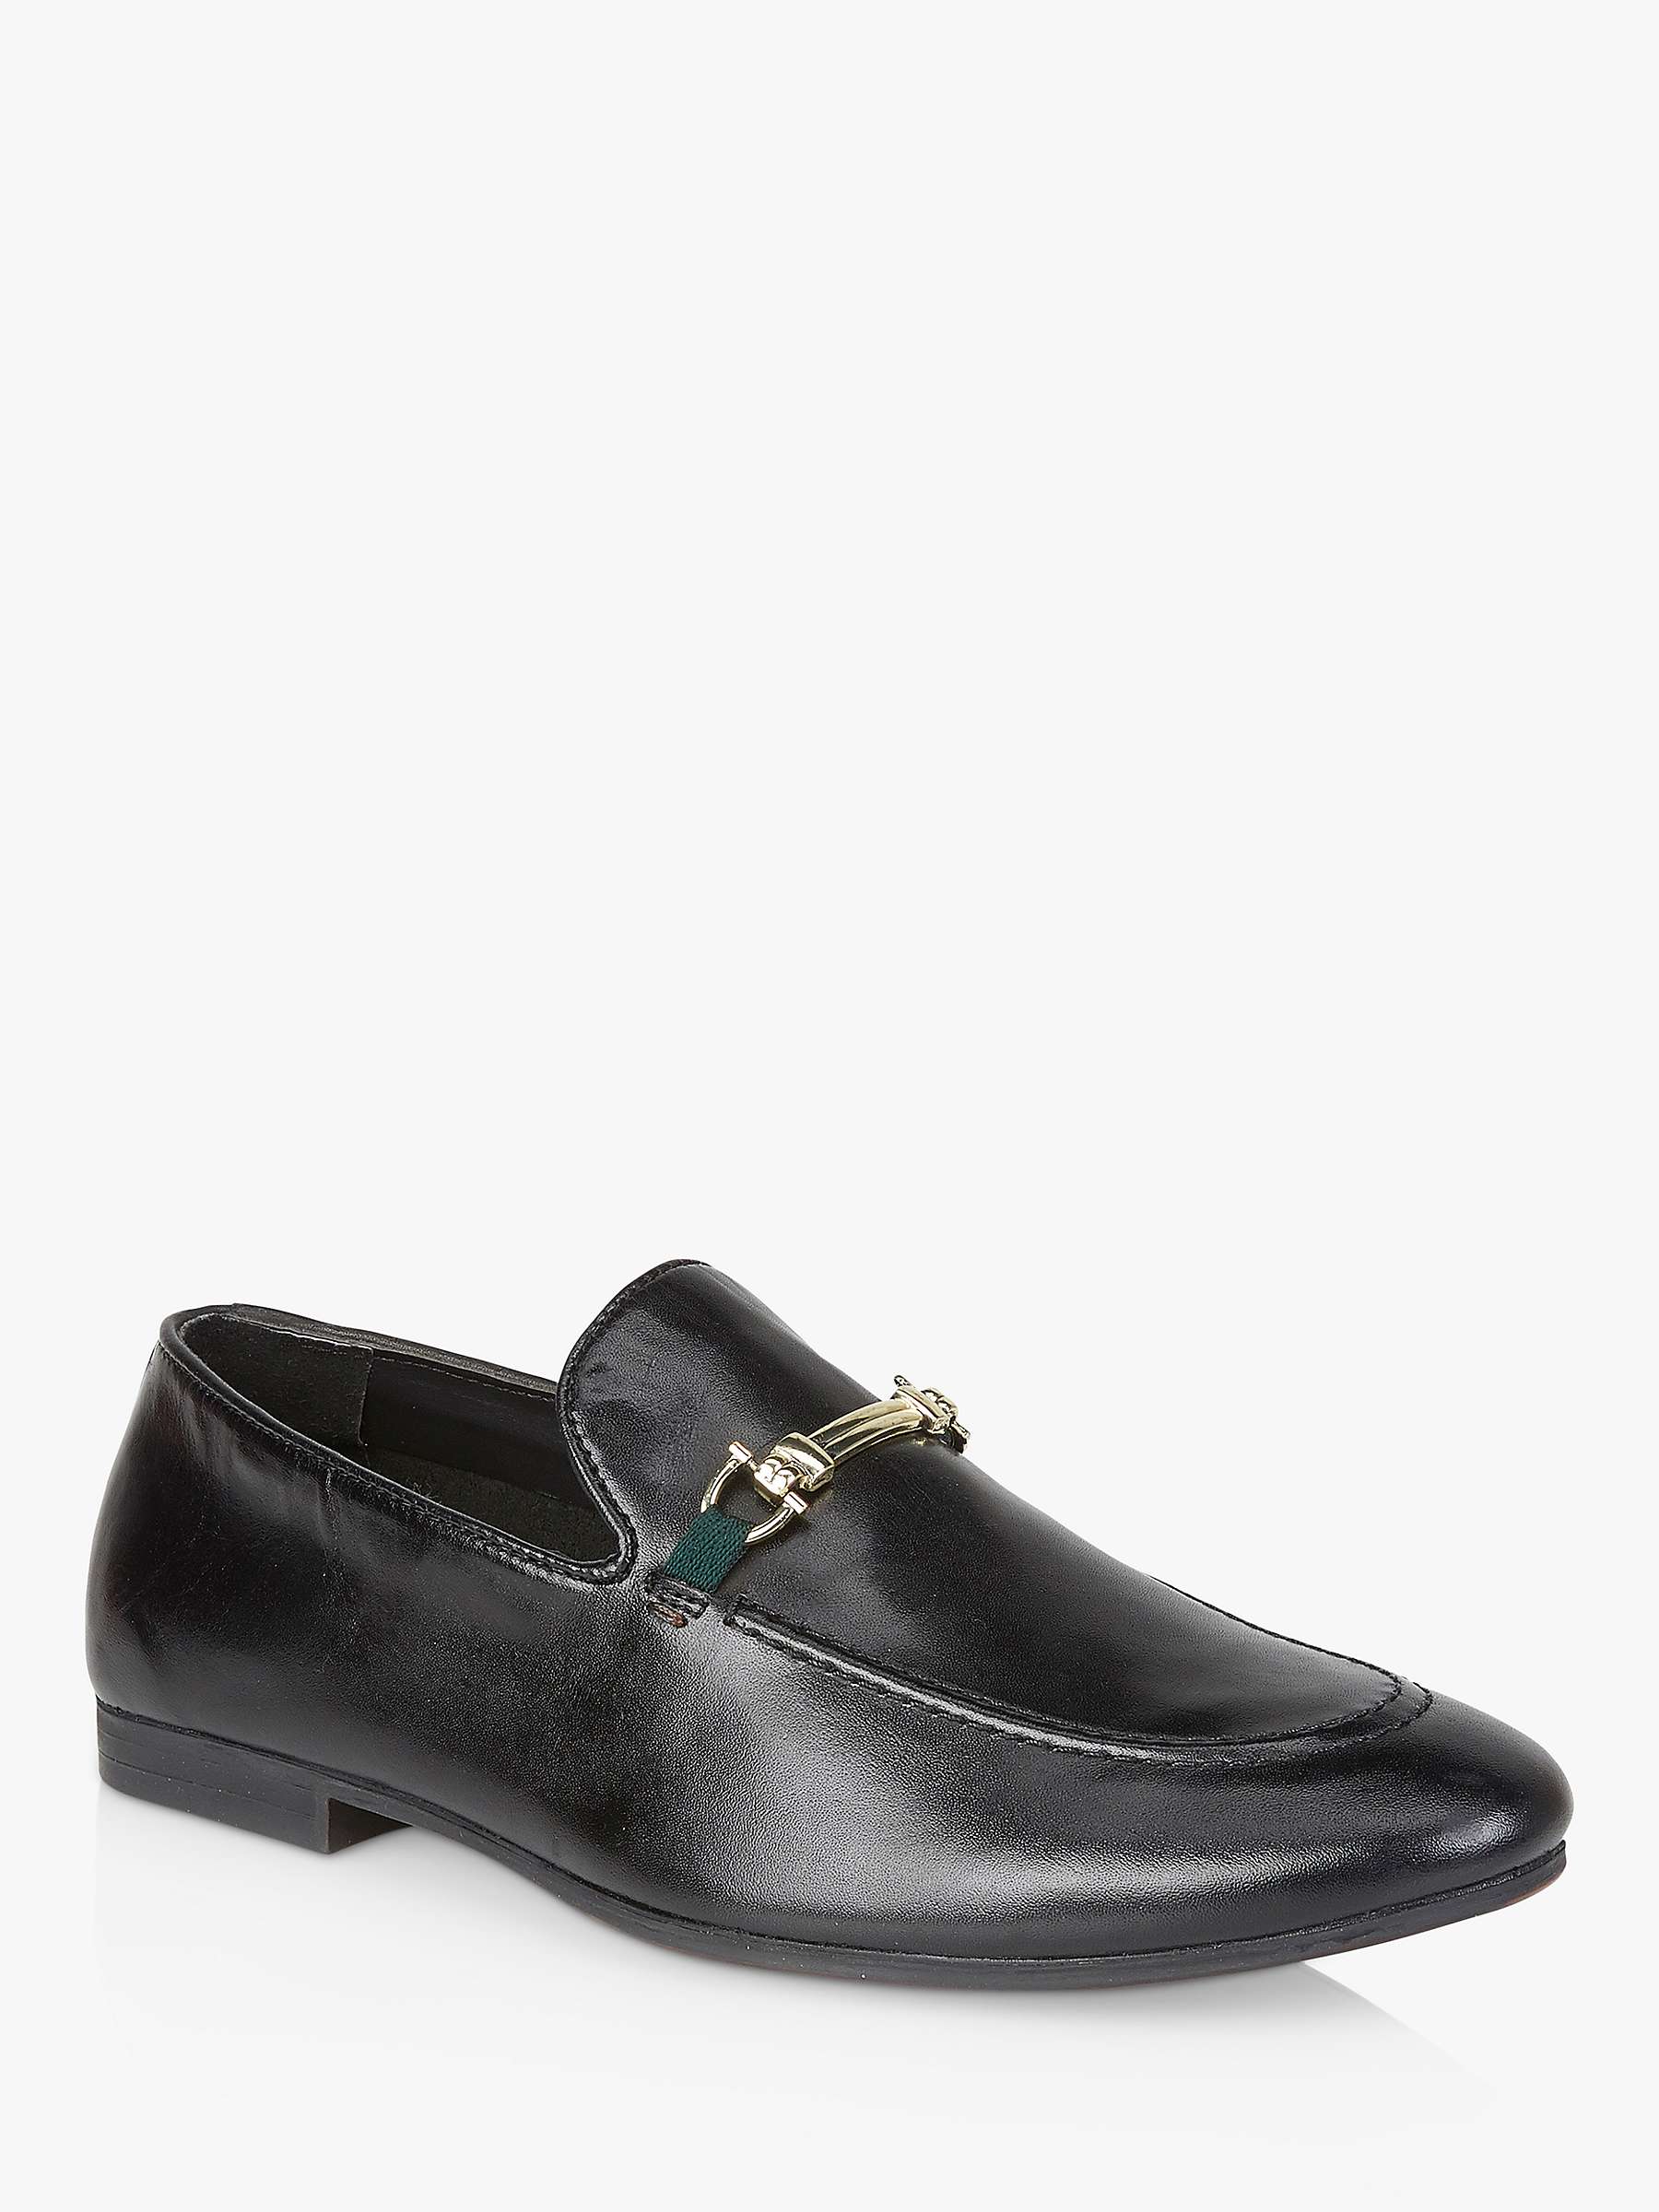 Buy Silver Street London Tottenham Leather Loafers Online at johnlewis.com